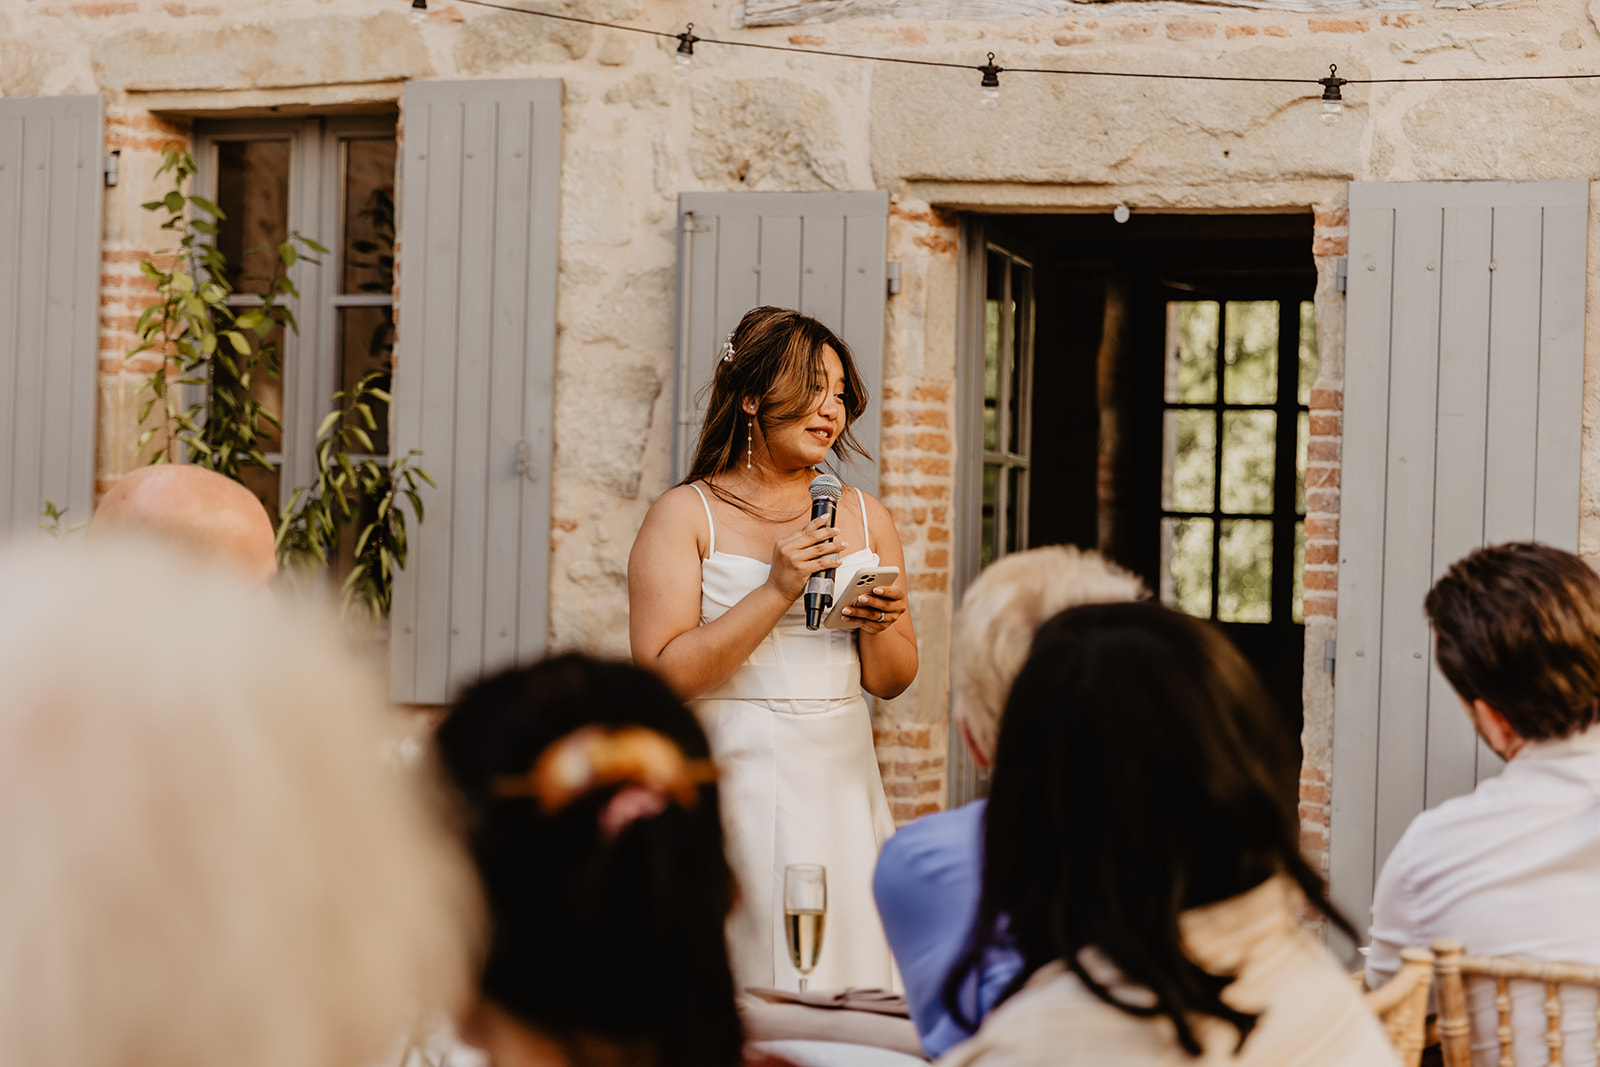 Reception speeches at a Destination Wedding in France. Photography & Videography by OliveJoy Photography